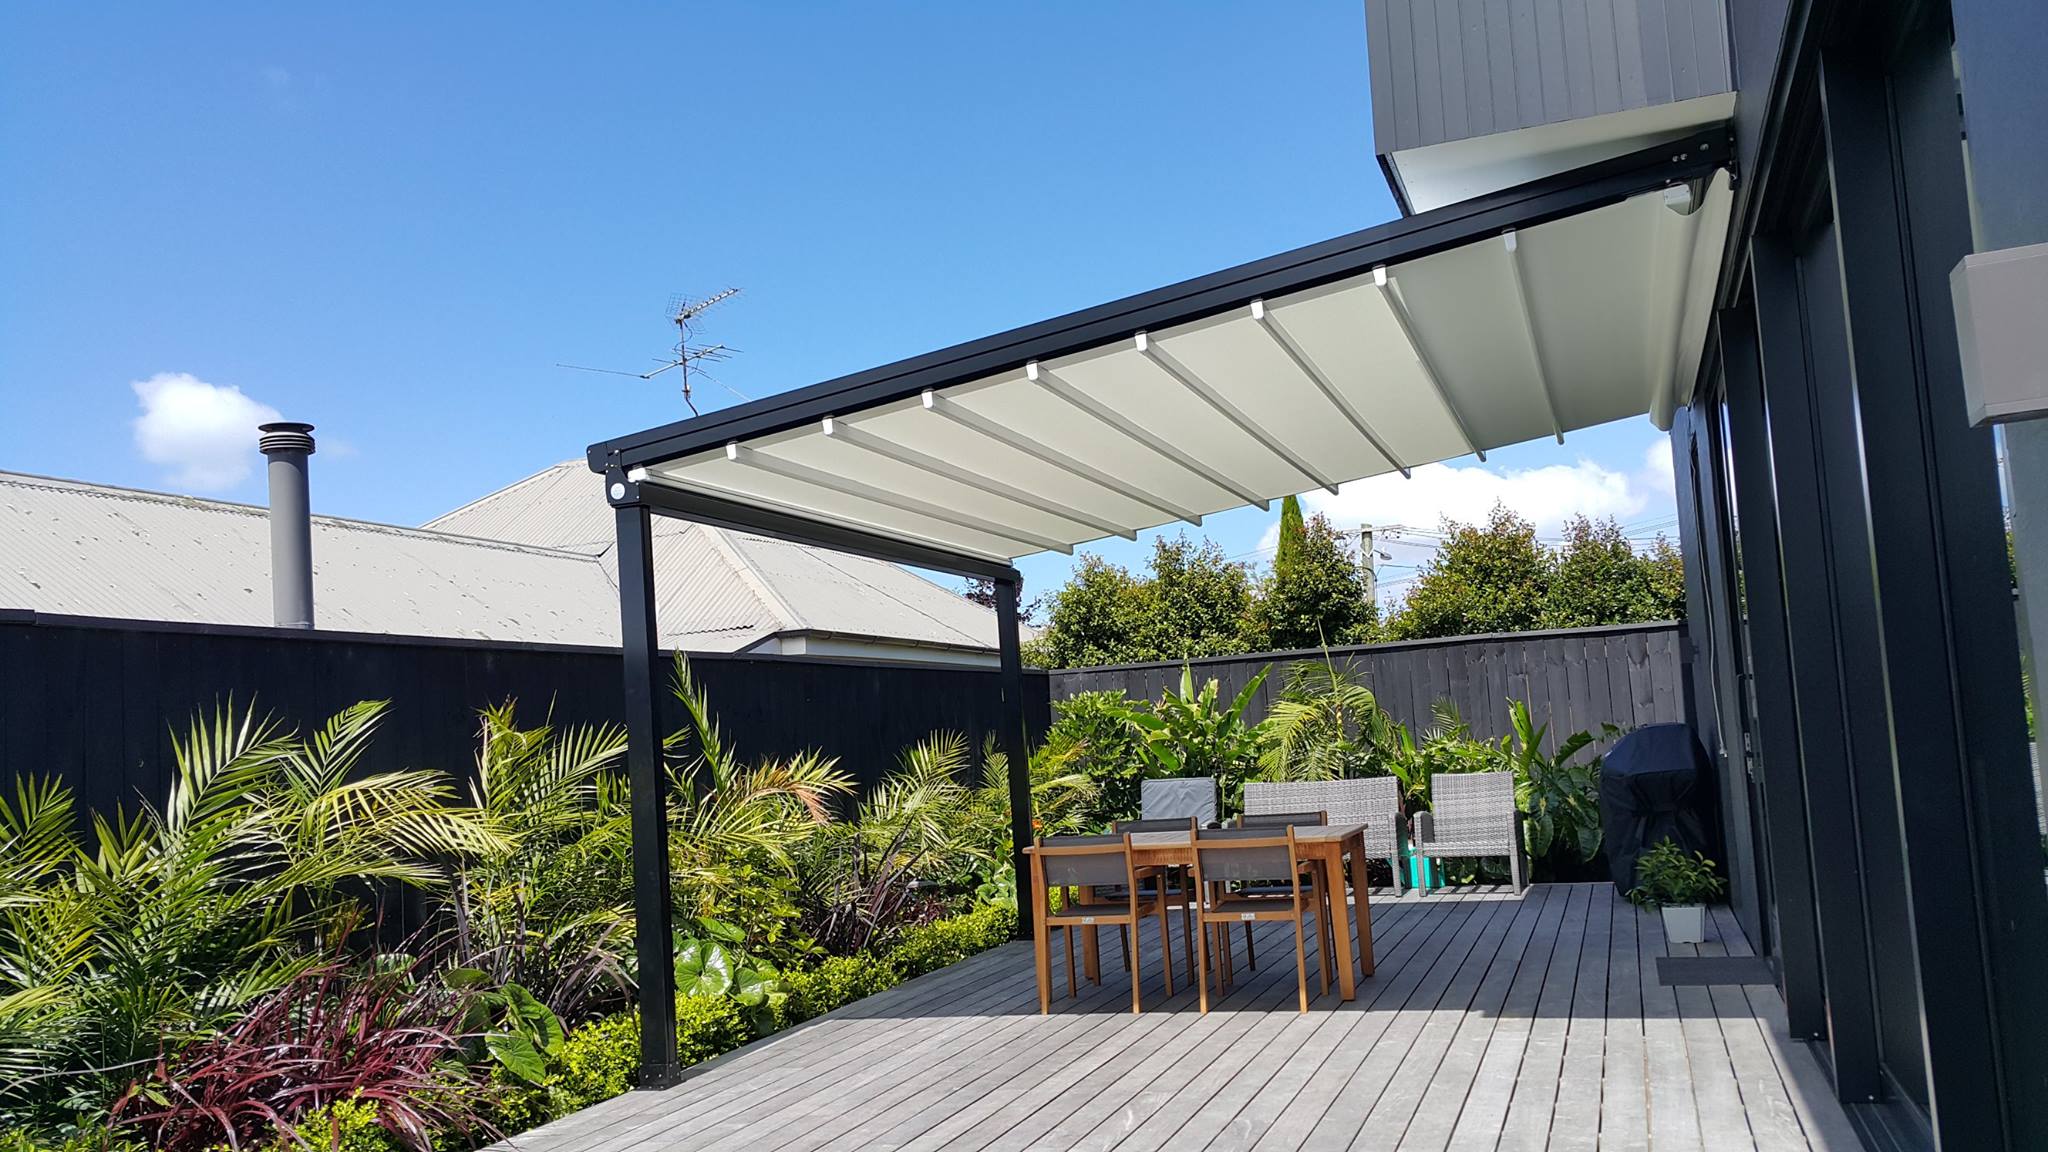 Oztech Retractable Roof Systems Nz, Patio Roofing Options Nz